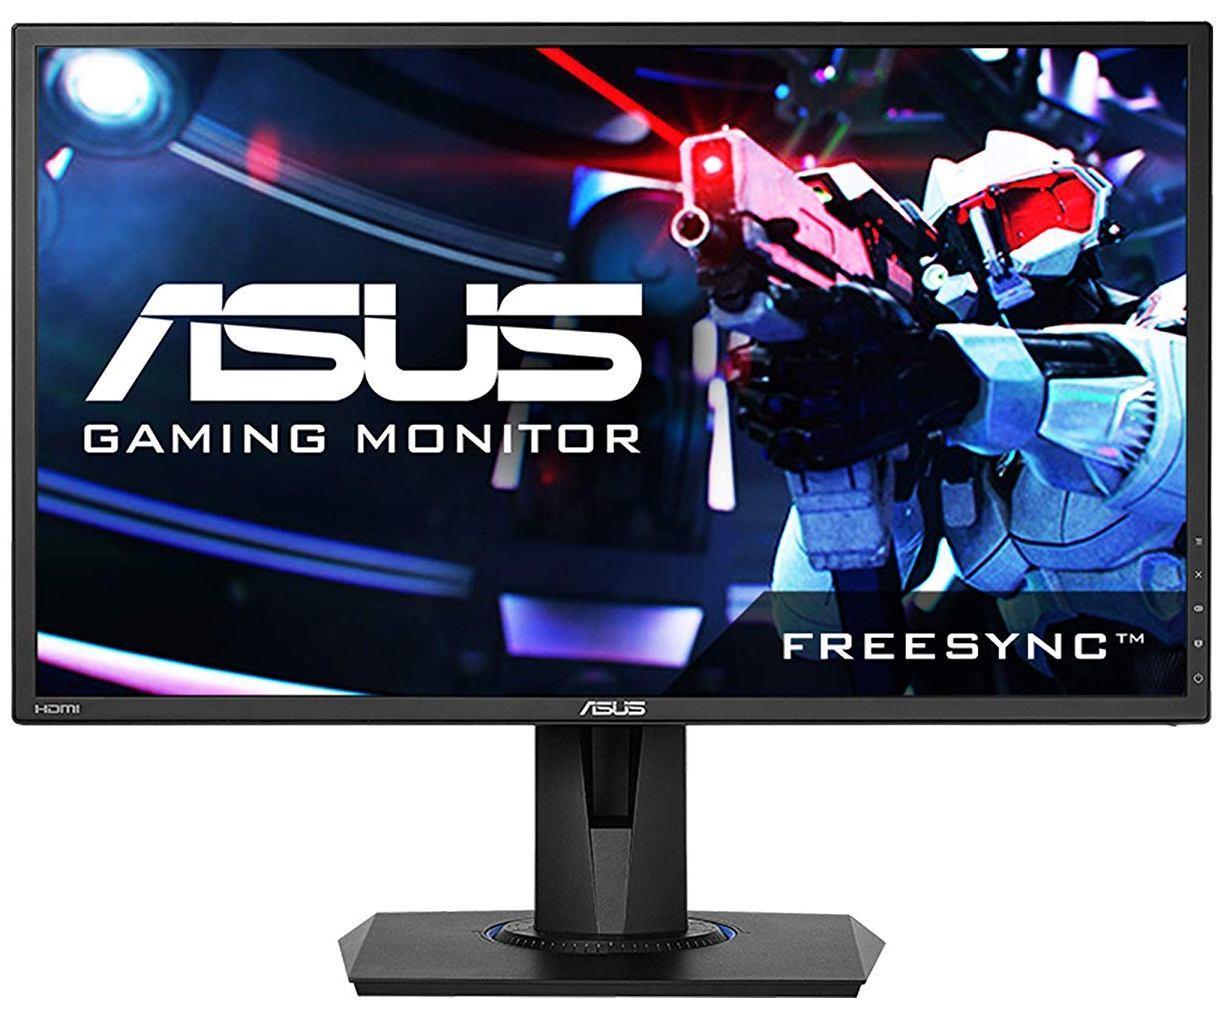 Top 10 Best Gaming Monitors for Console - Asus VG245H 24 inch